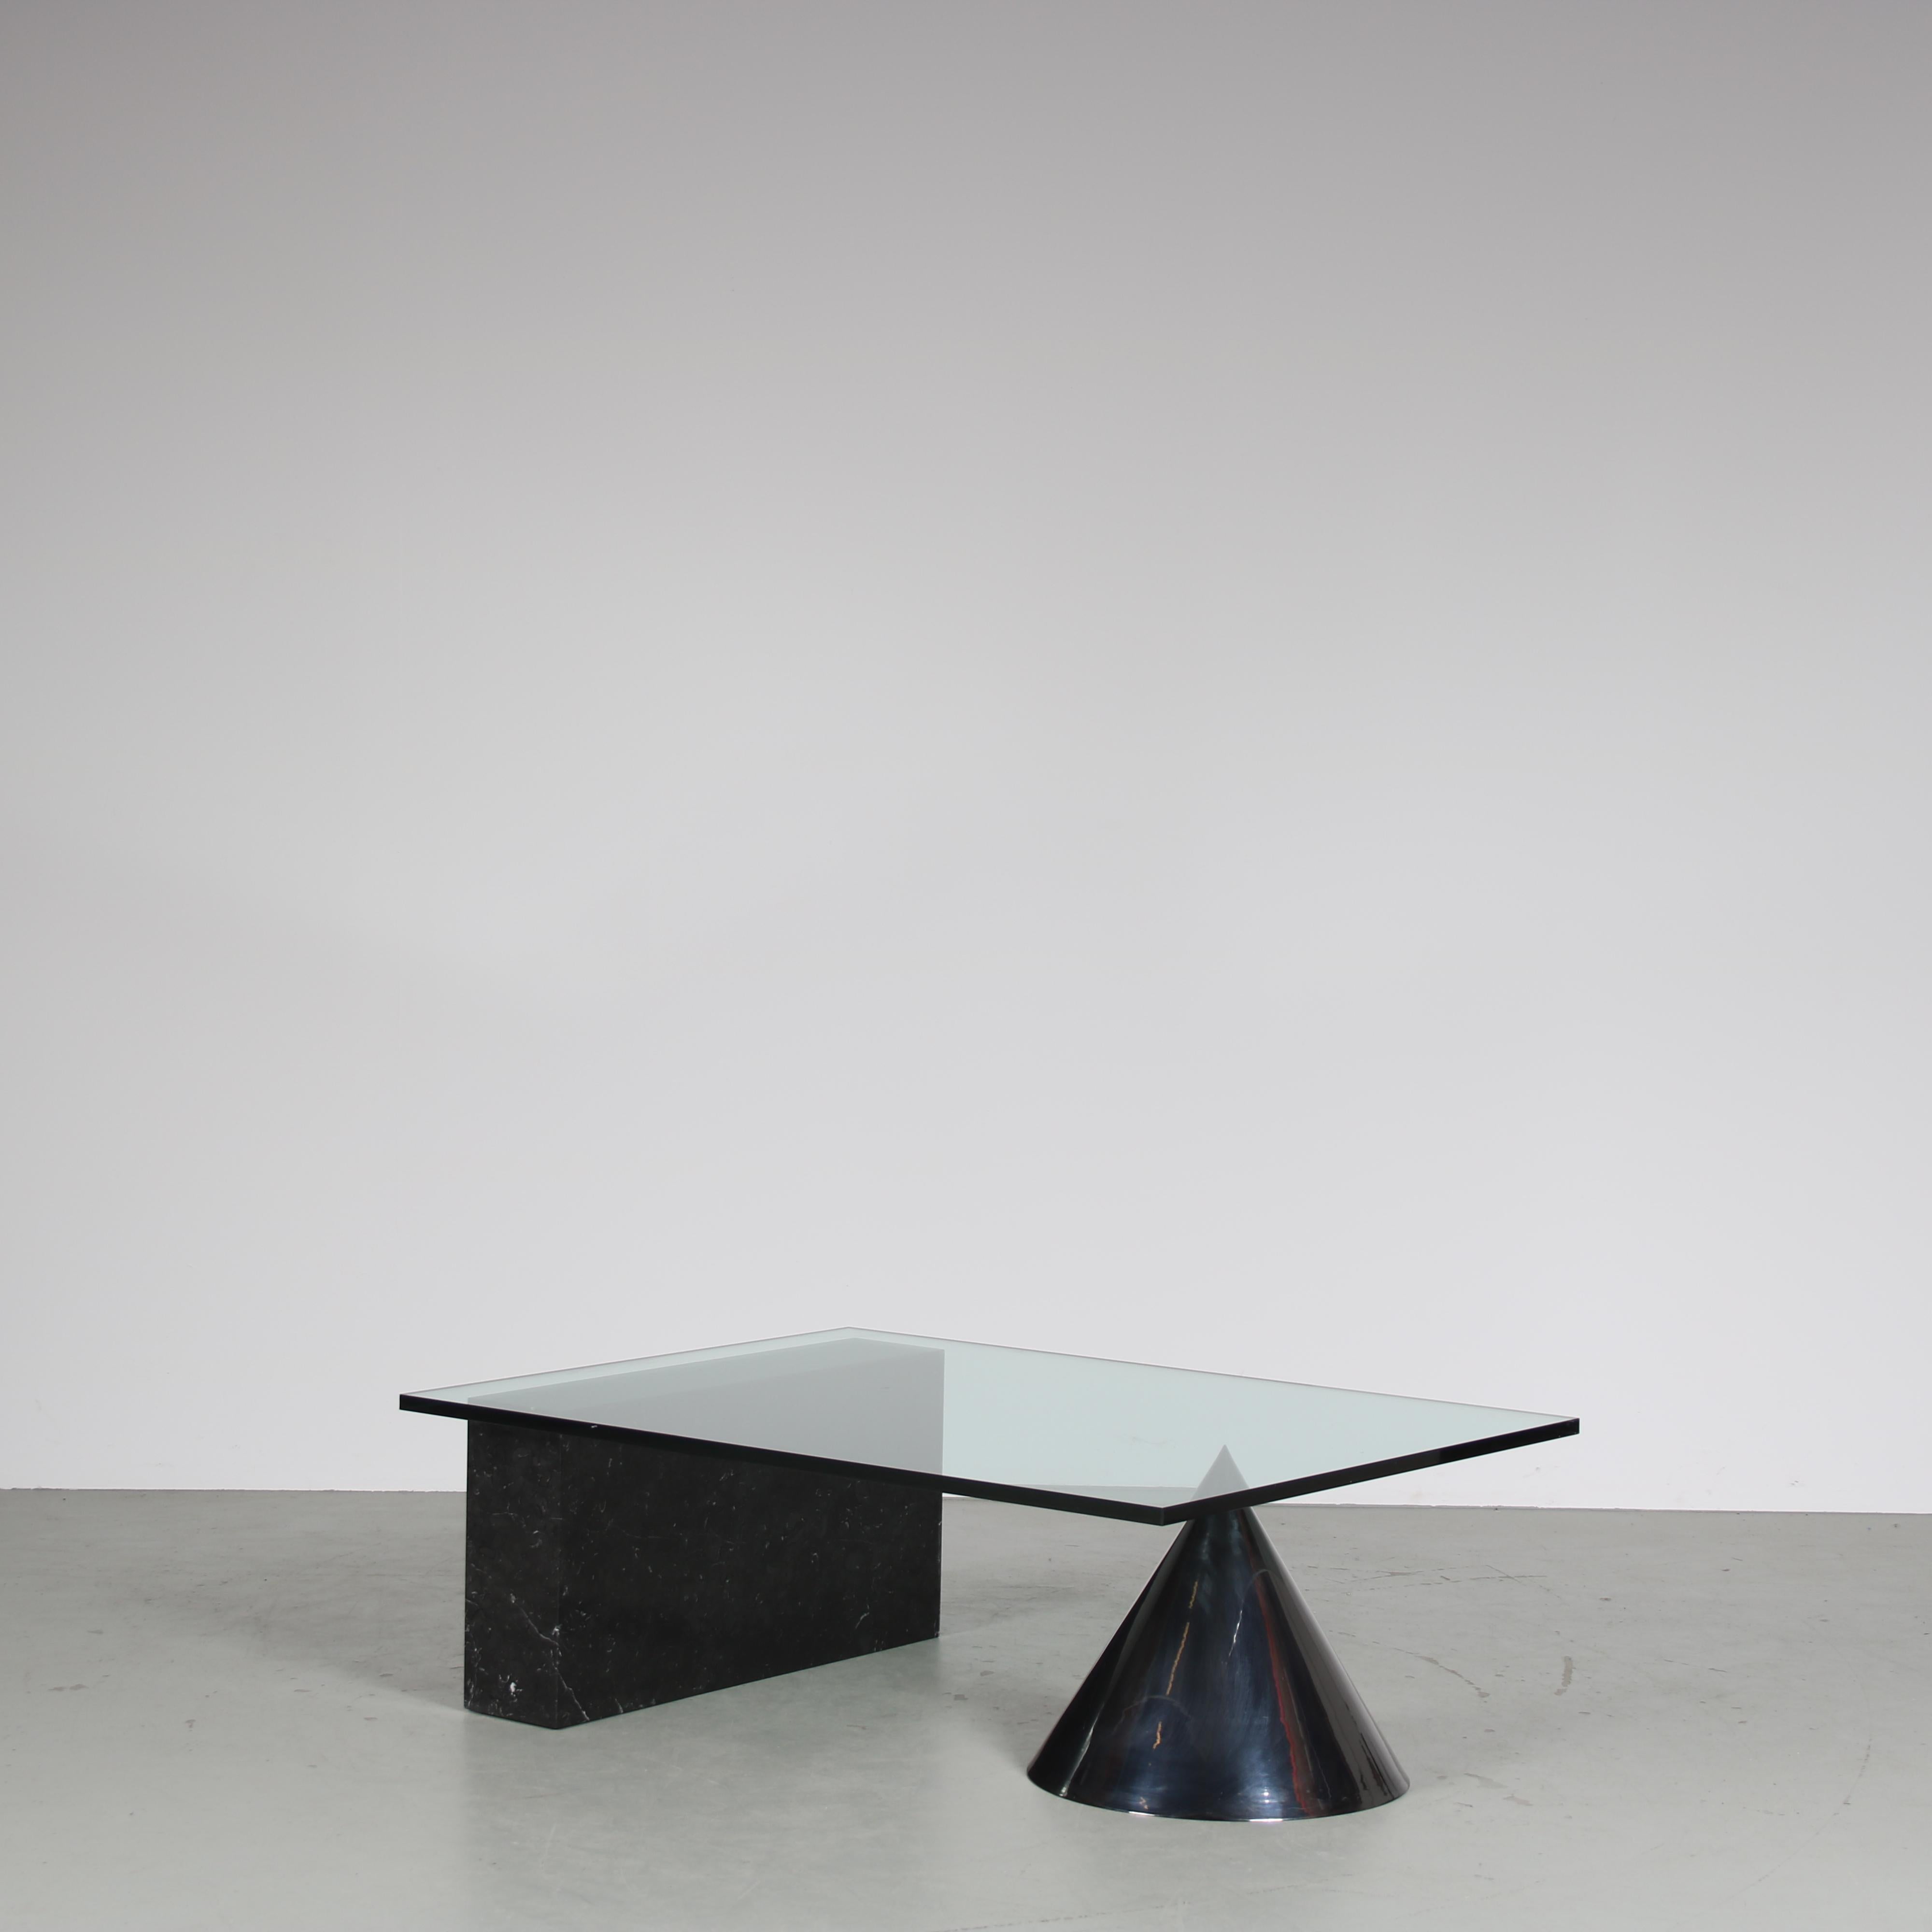 A stunning 1980s coffee table model “Kono,” designed by Massimo and Lella Vignelli and manufactured by Casigliani in Italy.

This coffee table features a glass top that allows for a clear view of the exquisite base. The base is a combination of one